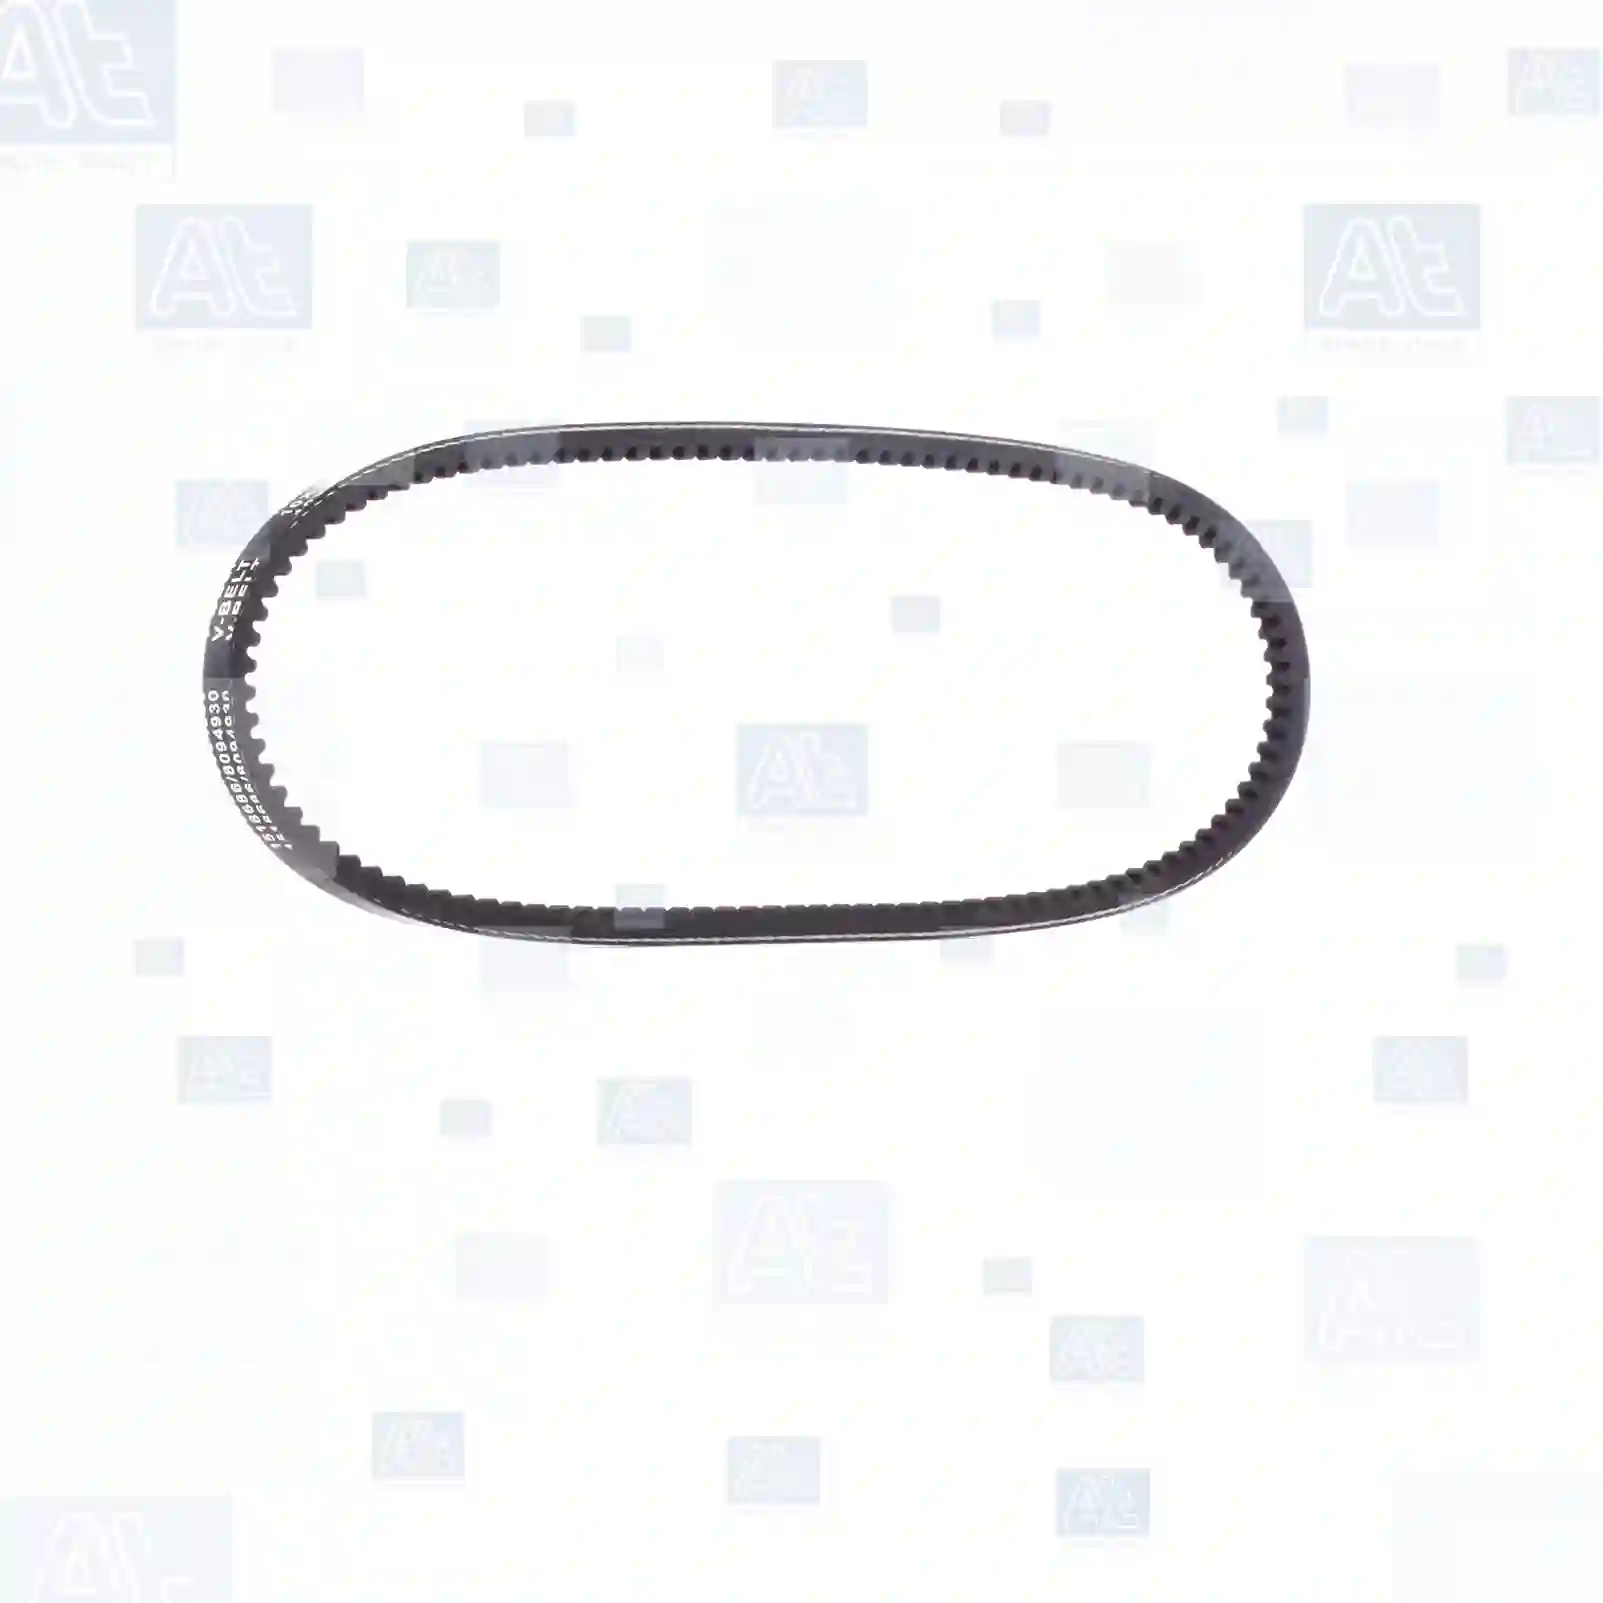 V-belt, 77707501, 1040002103, 021131615A, 068903137AM, 068903137AP, ADU8912, CAM9989, ETC4266, GCB10706, GCB10715, GFB10706, GFB10725, GFB260, GFB362, 23223048, 055356, 222022, 575073, 5750F6, 5750ST, 007027, 3040481, 222022, 9004832126, 9004832126000, 04070393, 04385150, 04503472, 04511850, 07302819, 07610476, 7302819, 9153633880, 91536338, 1631113, 5026967, 6158759, 21083701720, 2108370172001, 3701720, 04385150, 04503472, 04511850, 07302819, 07610476, AY0215908, 1040002103, ADU8912, CAM9989, ETC4266, GCB10706, GCB10715, GFB10706, GFB10725, GFB260, GFB362, MD017877, ADU8912, CAM9989, ETC4266, GCB10706, GCB10715, GFB10706, GFB10725, GFB260, GFB362, 01978-00704, 14853-23000, 14853-23001, 14853-25602, 14853-25603, 055356, 222022, 575073, 5750F6, 5750ST, 99919201350, 99919217650, 5750F6, 91536338, 7700704698, 151209EVA, ADU8912, CAM9989, ETC4266, GCB10706, GCB10715, GFB10706, GFB10725, GFB260, GFB362, 809110150, 809110330, 17521-76G01, 90861-07300, 90916-02028, 99511-10705, ADU8912, CAM9989, ETC4266, GCB10706, GCB10715, GFB10706, GFB10725, GFB260, GFB362, 950805, 021131615, 021131615A, 068903137AM, 068903137AP, 21083701720, 2108370172001 ||  77707501 At Spare Part | Engine, Accelerator Pedal, Camshaft, Connecting Rod, Crankcase, Crankshaft, Cylinder Head, Engine Suspension Mountings, Exhaust Manifold, Exhaust Gas Recirculation, Filter Kits, Flywheel Housing, General Overhaul Kits, Engine, Intake Manifold, Oil Cleaner, Oil Cooler, Oil Filter, Oil Pump, Oil Sump, Piston & Liner, Sensor & Switch, Timing Case, Turbocharger, Cooling System, Belt Tensioner, Coolant Filter, Coolant Pipe, Corrosion Prevention Agent, Drive, Expansion Tank, Fan, Intercooler, Monitors & Gauges, Radiator, Thermostat, V-Belt / Timing belt, Water Pump, Fuel System, Electronical Injector Unit, Feed Pump, Fuel Filter, cpl., Fuel Gauge Sender,  Fuel Line, Fuel Pump, Fuel Tank, Injection Line Kit, Injection Pump, Exhaust System, Clutch & Pedal, Gearbox, Propeller Shaft, Axles, Brake System, Hubs & Wheels, Suspension, Leaf Spring, Universal Parts / Accessories, Steering, Electrical System, Cabin V-belt, 77707501, 1040002103, 021131615A, 068903137AM, 068903137AP, ADU8912, CAM9989, ETC4266, GCB10706, GCB10715, GFB10706, GFB10725, GFB260, GFB362, 23223048, 055356, 222022, 575073, 5750F6, 5750ST, 007027, 3040481, 222022, 9004832126, 9004832126000, 04070393, 04385150, 04503472, 04511850, 07302819, 07610476, 7302819, 9153633880, 91536338, 1631113, 5026967, 6158759, 21083701720, 2108370172001, 3701720, 04385150, 04503472, 04511850, 07302819, 07610476, AY0215908, 1040002103, ADU8912, CAM9989, ETC4266, GCB10706, GCB10715, GFB10706, GFB10725, GFB260, GFB362, MD017877, ADU8912, CAM9989, ETC4266, GCB10706, GCB10715, GFB10706, GFB10725, GFB260, GFB362, 01978-00704, 14853-23000, 14853-23001, 14853-25602, 14853-25603, 055356, 222022, 575073, 5750F6, 5750ST, 99919201350, 99919217650, 5750F6, 91536338, 7700704698, 151209EVA, ADU8912, CAM9989, ETC4266, GCB10706, GCB10715, GFB10706, GFB10725, GFB260, GFB362, 809110150, 809110330, 17521-76G01, 90861-07300, 90916-02028, 99511-10705, ADU8912, CAM9989, ETC4266, GCB10706, GCB10715, GFB10706, GFB10725, GFB260, GFB362, 950805, 021131615, 021131615A, 068903137AM, 068903137AP, 21083701720, 2108370172001 ||  77707501 At Spare Part | Engine, Accelerator Pedal, Camshaft, Connecting Rod, Crankcase, Crankshaft, Cylinder Head, Engine Suspension Mountings, Exhaust Manifold, Exhaust Gas Recirculation, Filter Kits, Flywheel Housing, General Overhaul Kits, Engine, Intake Manifold, Oil Cleaner, Oil Cooler, Oil Filter, Oil Pump, Oil Sump, Piston & Liner, Sensor & Switch, Timing Case, Turbocharger, Cooling System, Belt Tensioner, Coolant Filter, Coolant Pipe, Corrosion Prevention Agent, Drive, Expansion Tank, Fan, Intercooler, Monitors & Gauges, Radiator, Thermostat, V-Belt / Timing belt, Water Pump, Fuel System, Electronical Injector Unit, Feed Pump, Fuel Filter, cpl., Fuel Gauge Sender,  Fuel Line, Fuel Pump, Fuel Tank, Injection Line Kit, Injection Pump, Exhaust System, Clutch & Pedal, Gearbox, Propeller Shaft, Axles, Brake System, Hubs & Wheels, Suspension, Leaf Spring, Universal Parts / Accessories, Steering, Electrical System, Cabin